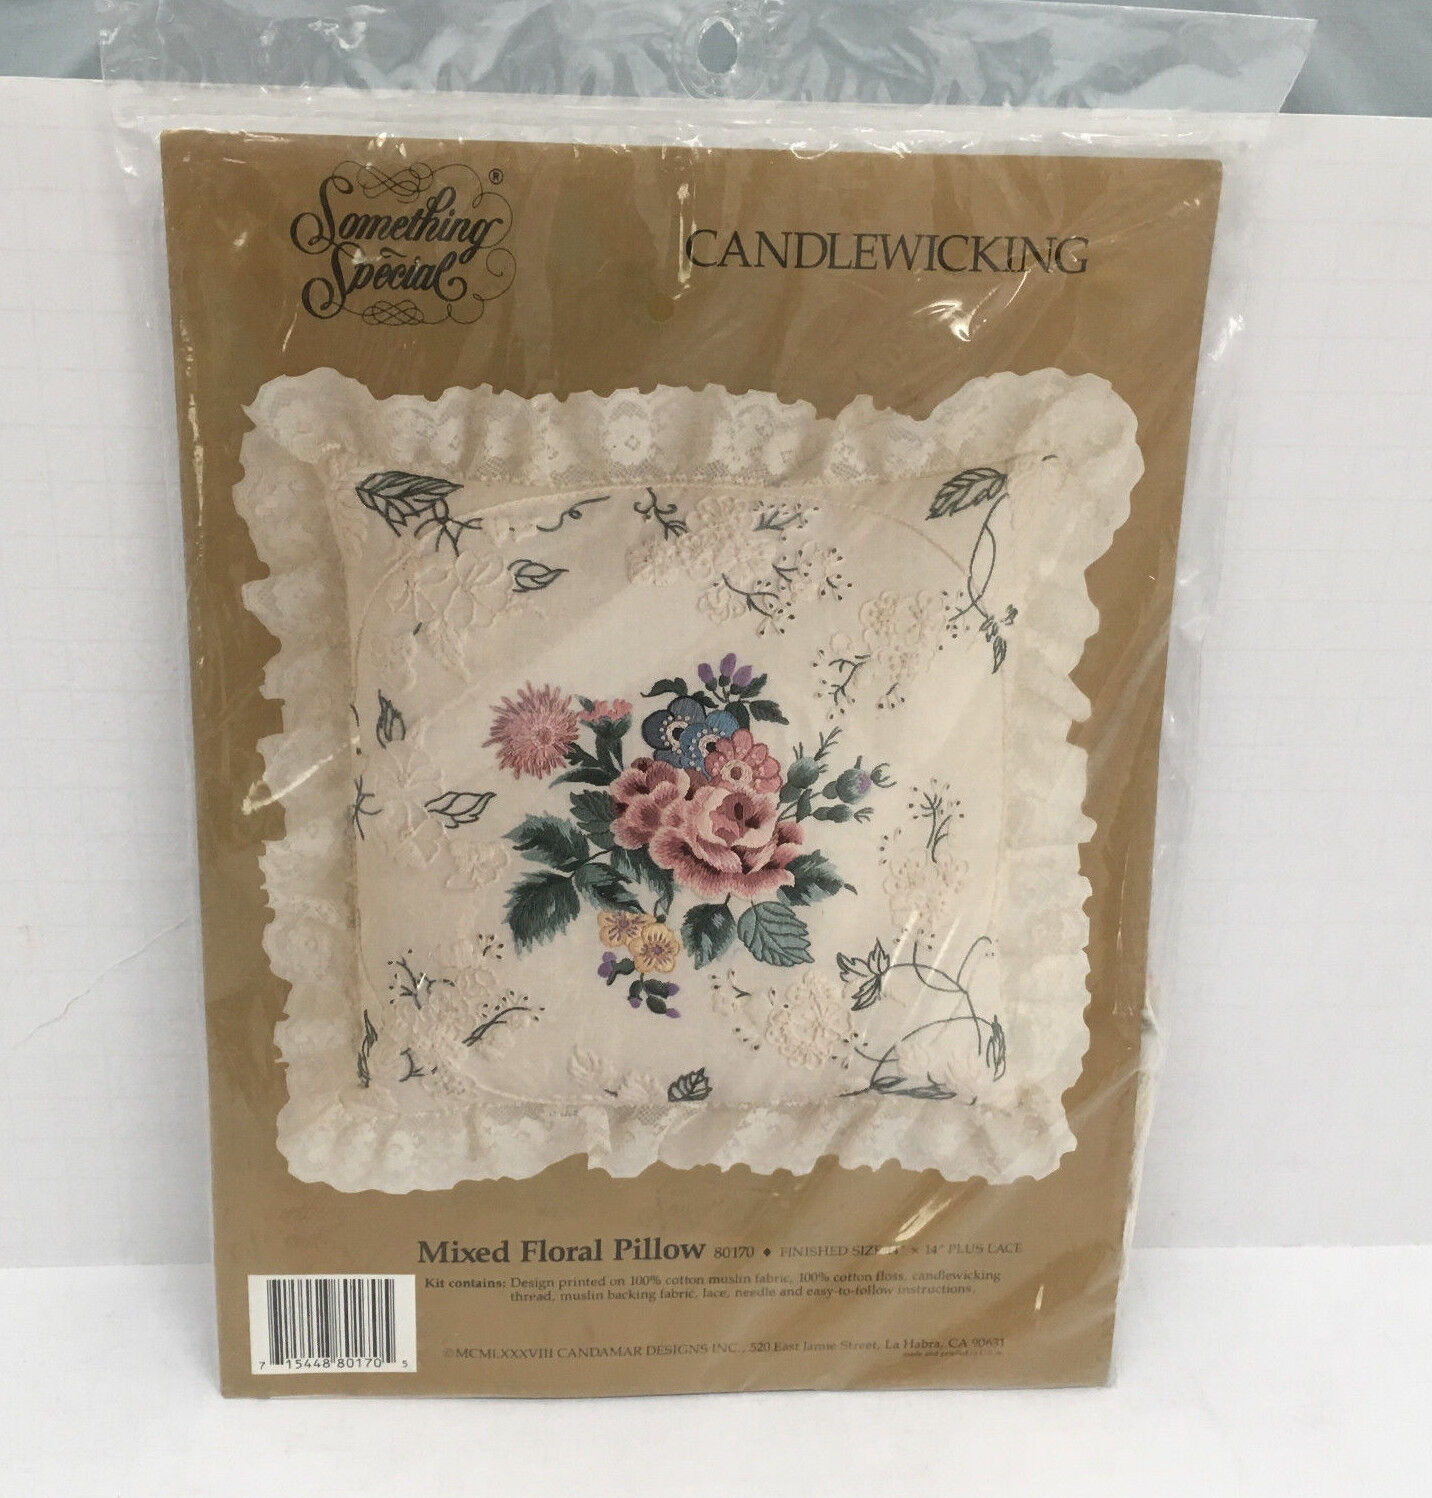 Vintage candlewicking kit mixed floral pillow something special brand never used - $29.65